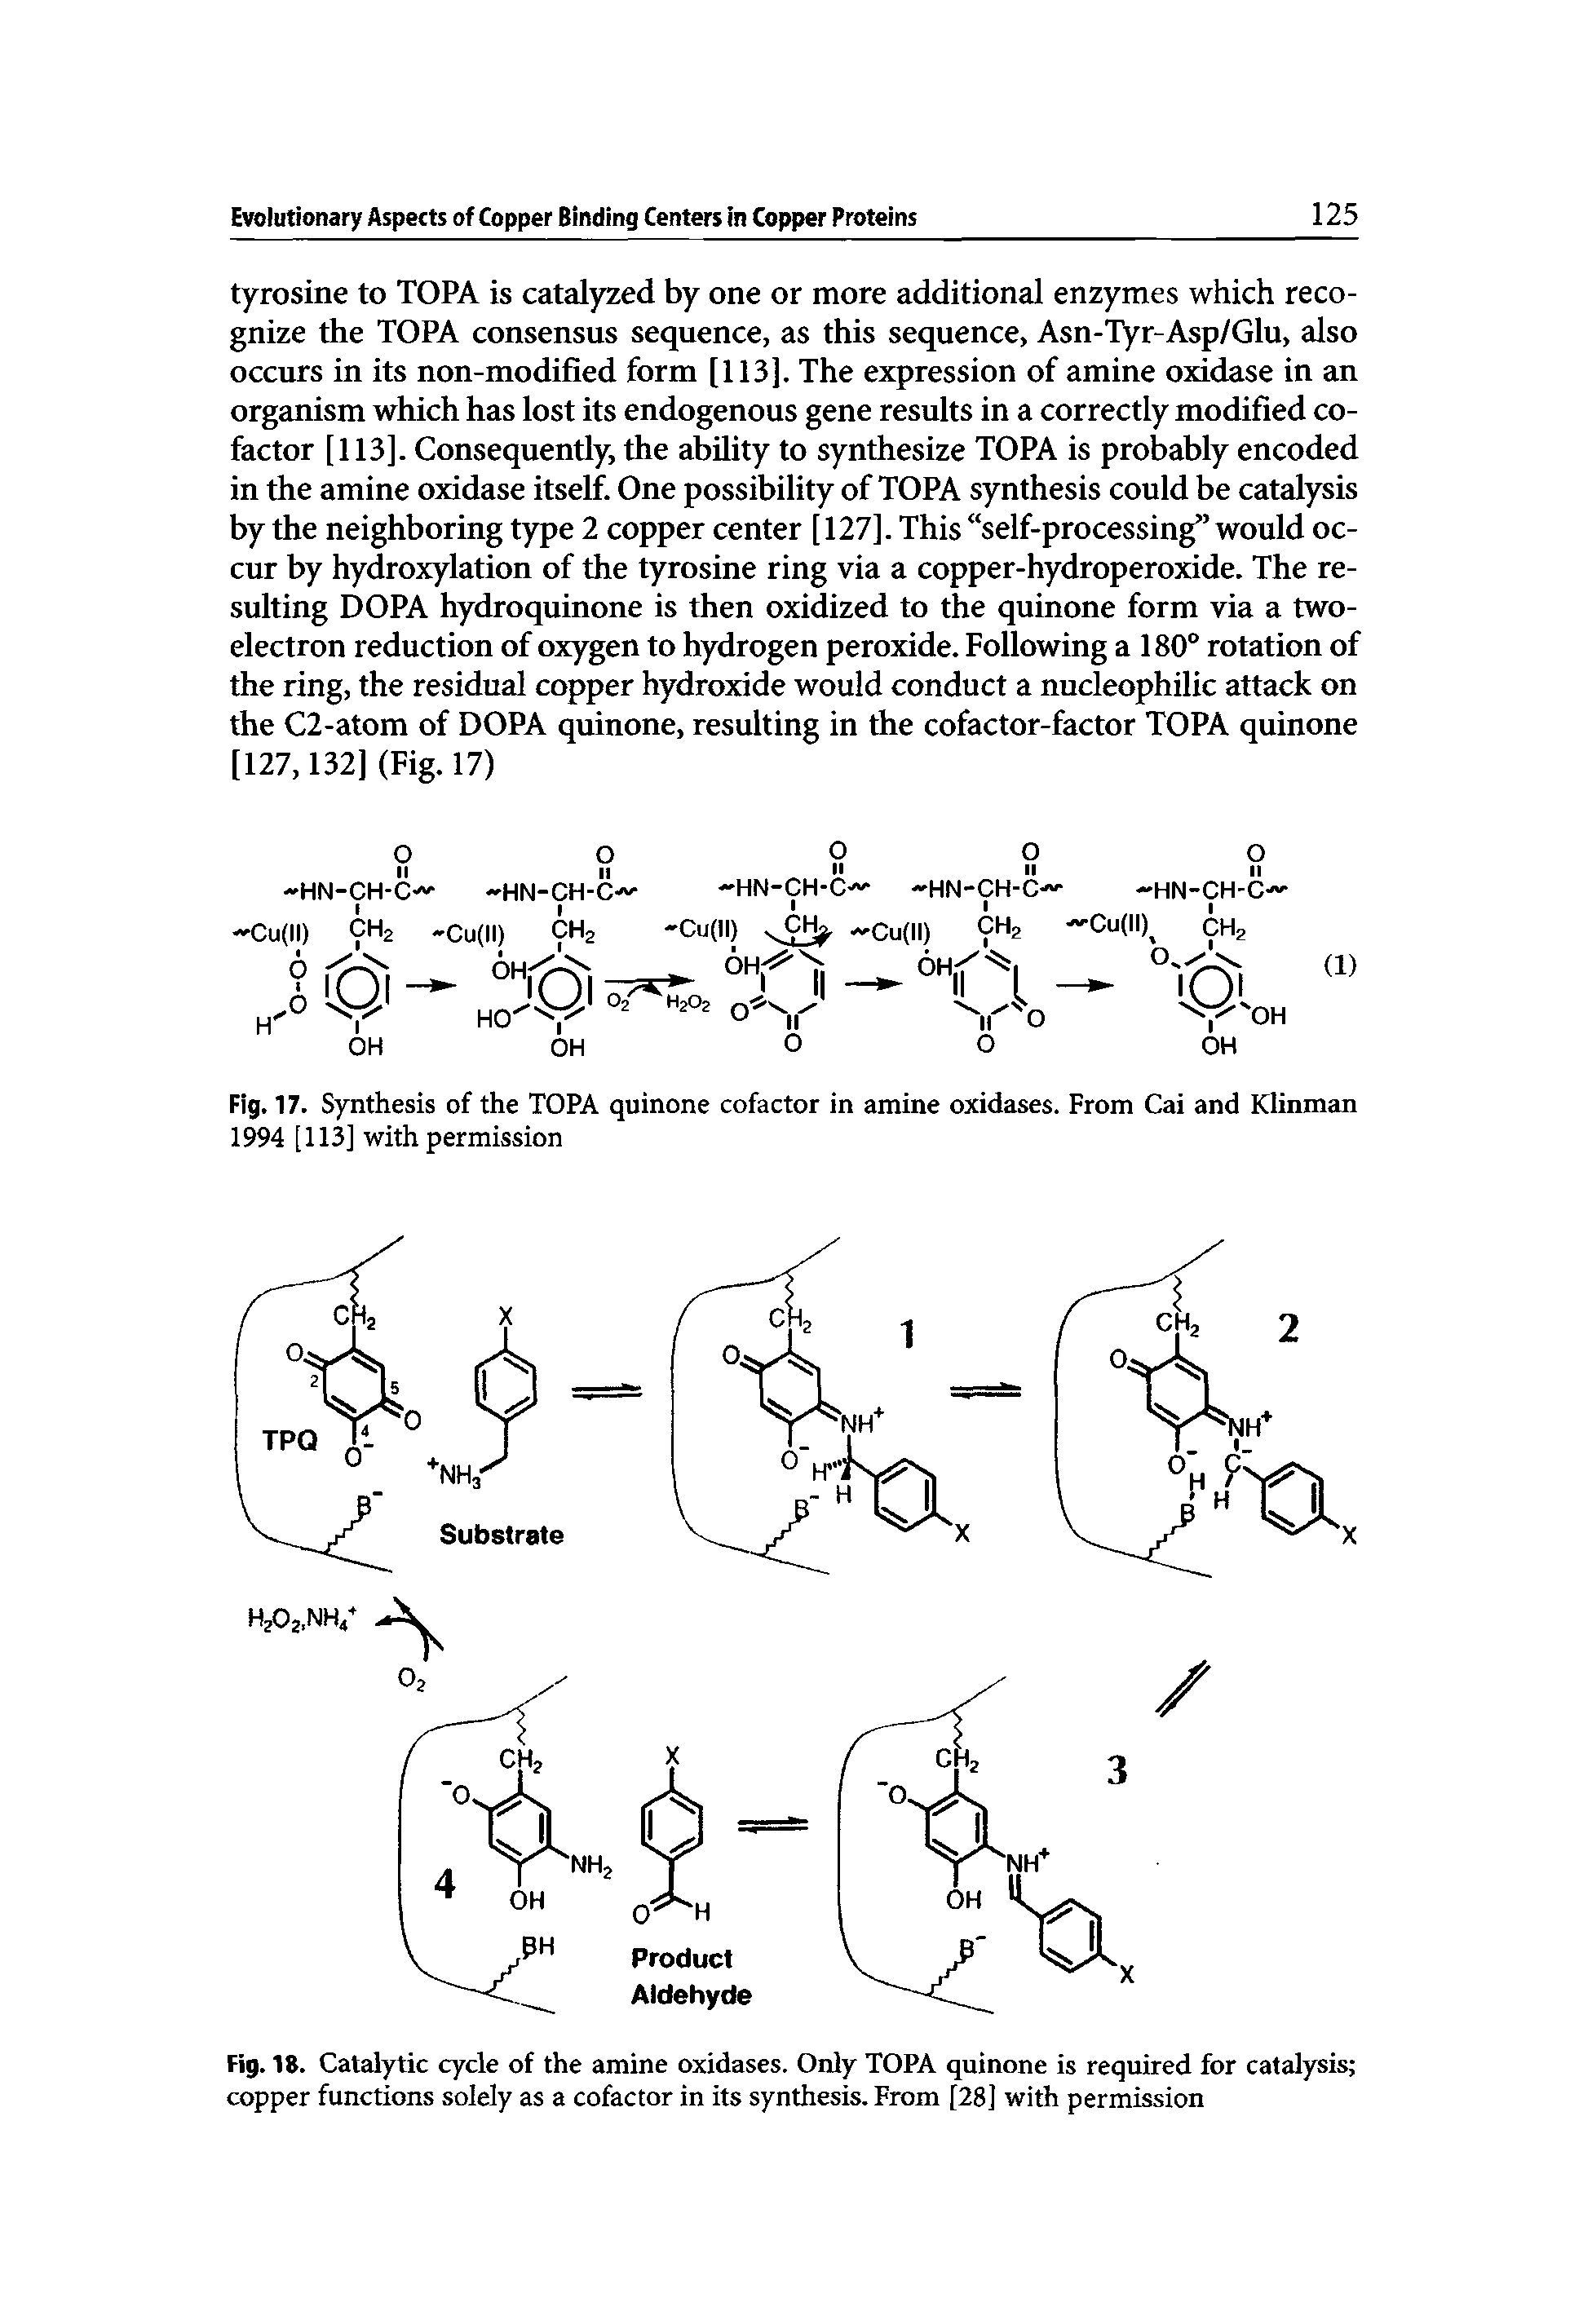 Fig. 18. Catalytic cycle of the amine oxidases. Only TOPA quinone is required for catalysis copper functions solely as a cofactor in its synthesis. From [28] with permission...